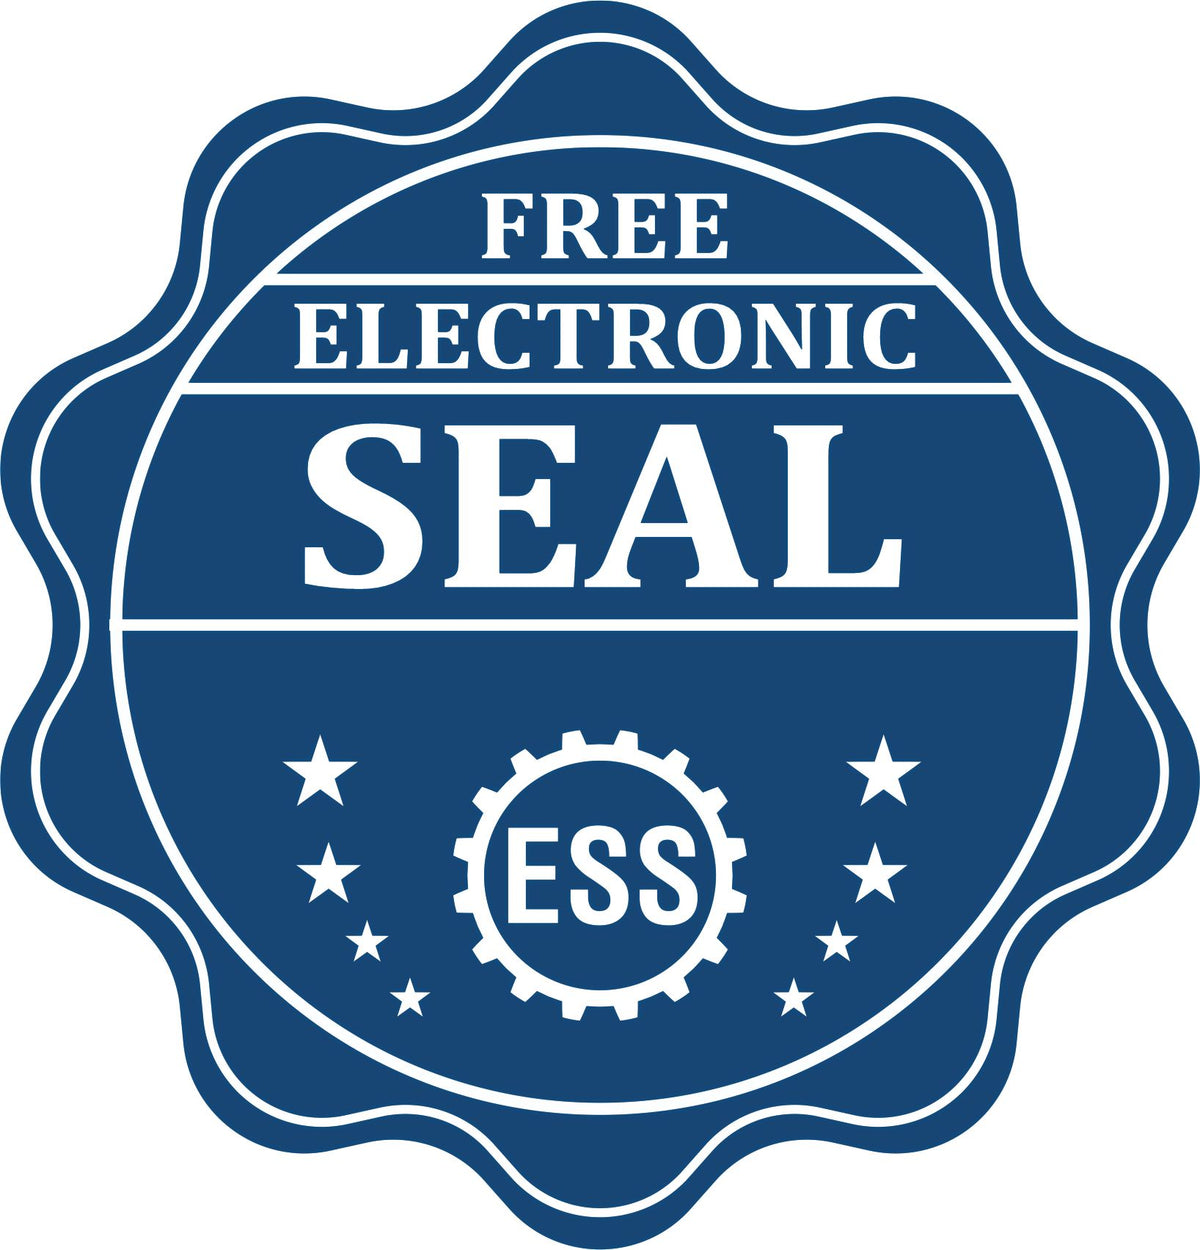 A badge showing a free electronic seal for the Slim Pre-Inked Indiana Professional Engineer Seal Stamp with stars and the ESS gear on the emblem.